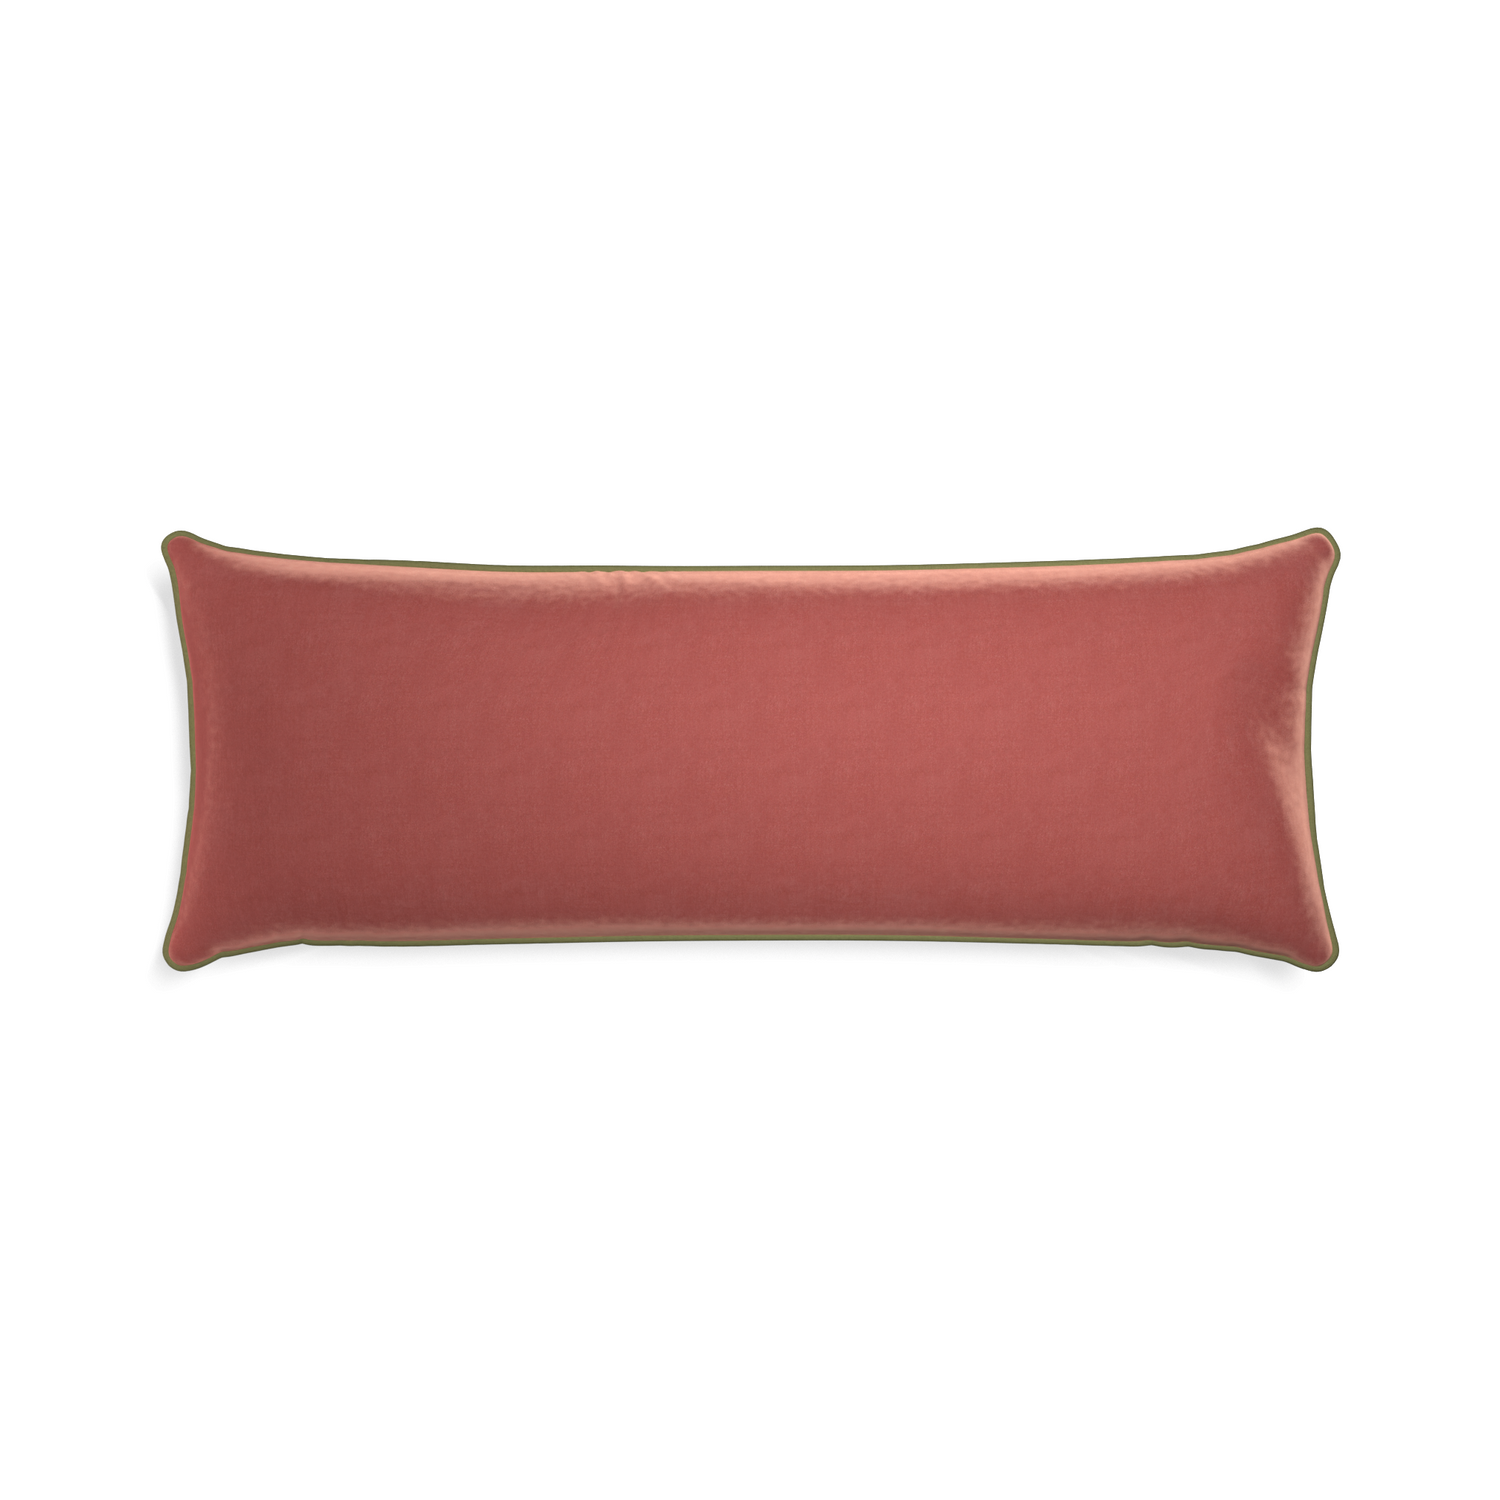 Xl-lumbar cosmo velvet custom coralpillow with moss piping on white background